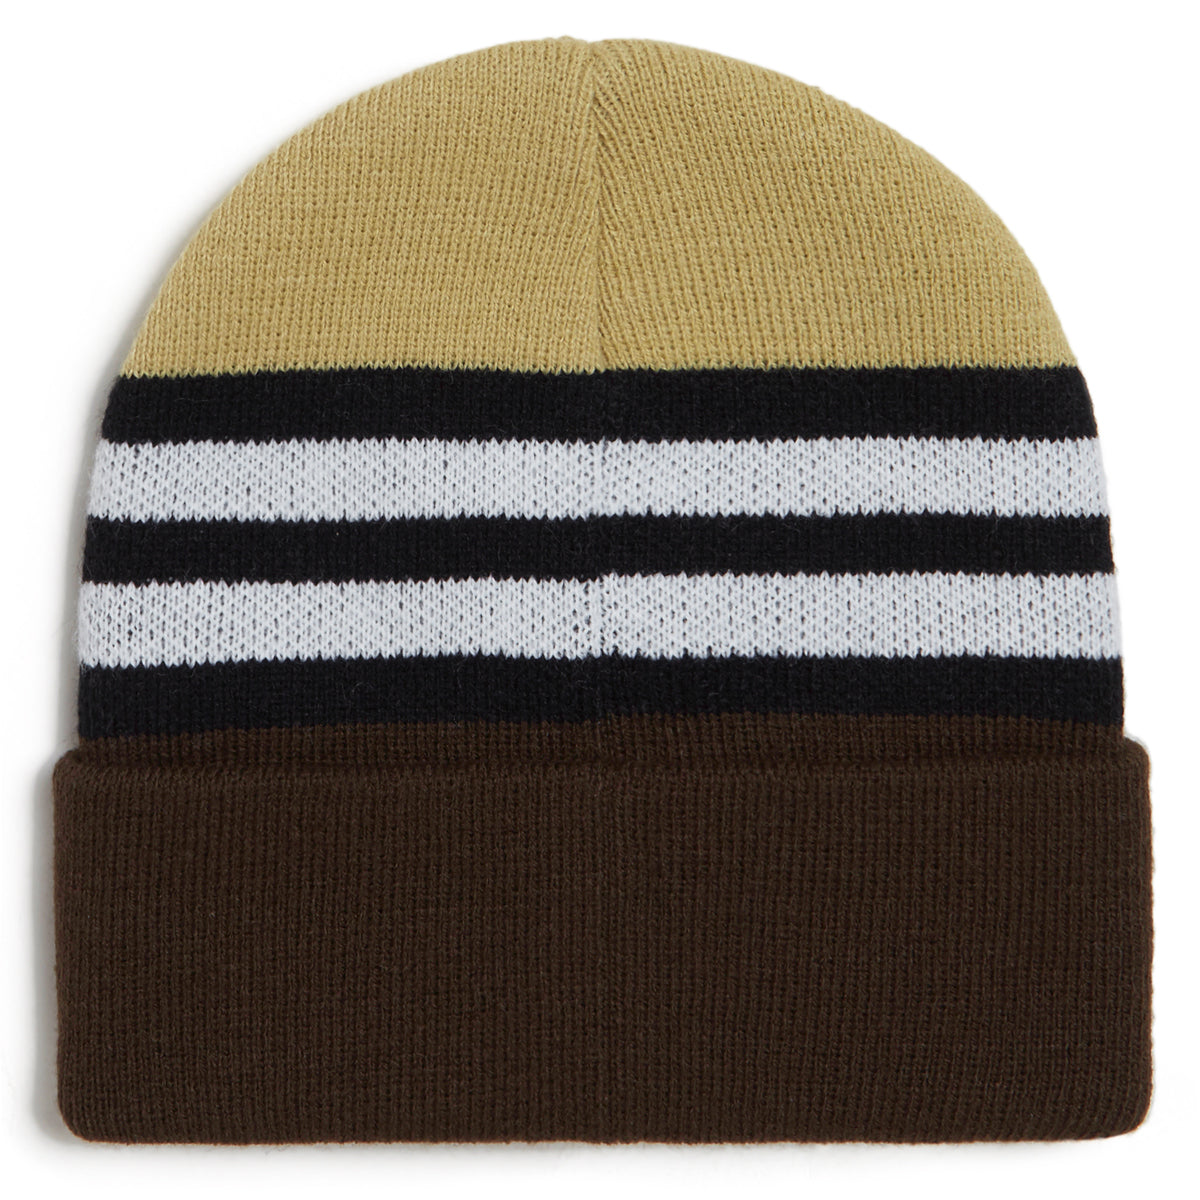 CCS Blockletters Beanie - Brown/Tan image 2